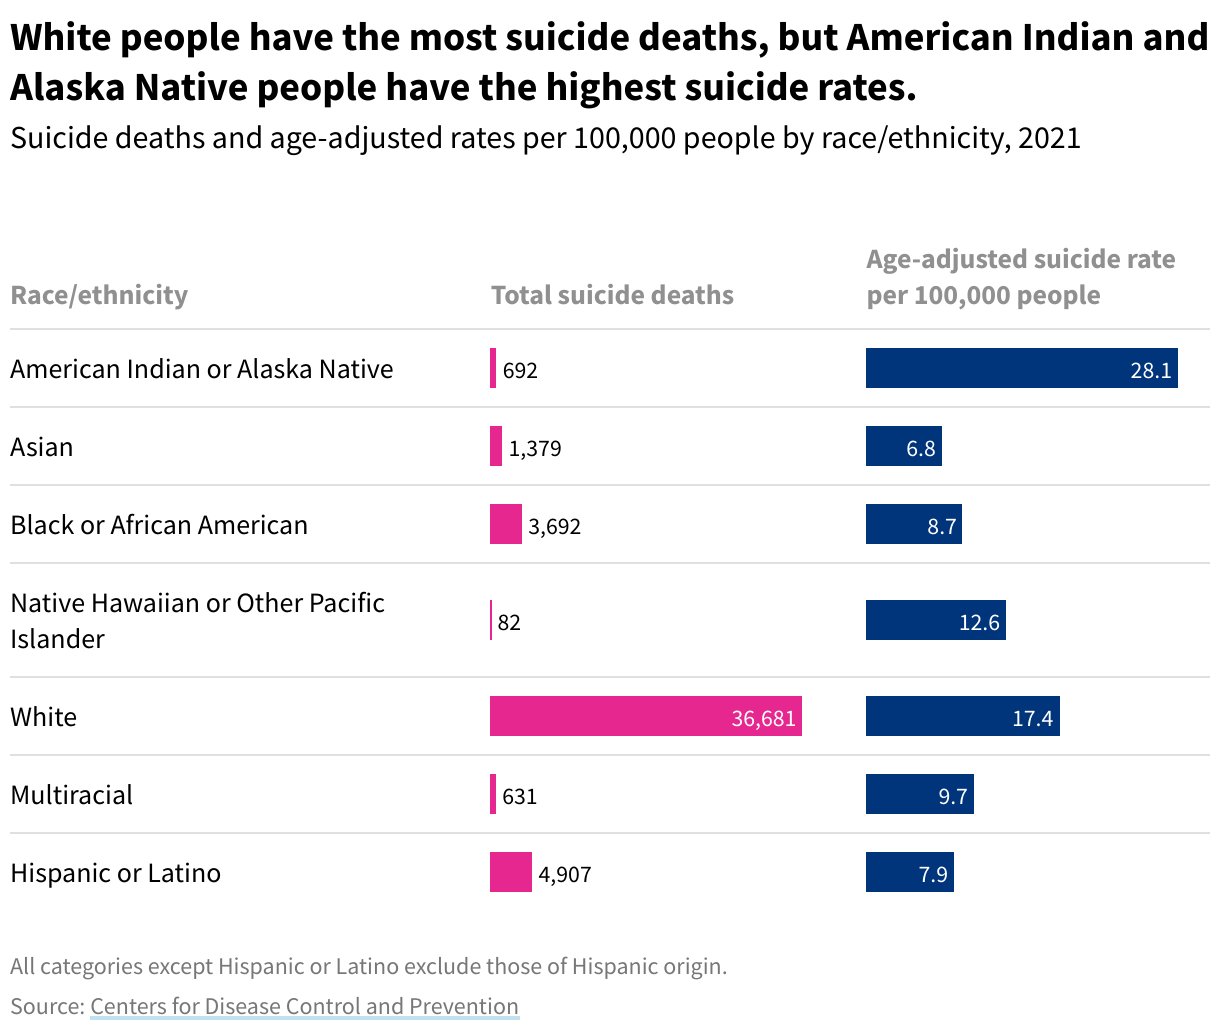 Table showing suicide deaths and age-adjusted rates per 100,000 people by race/ethnicity in 2021.